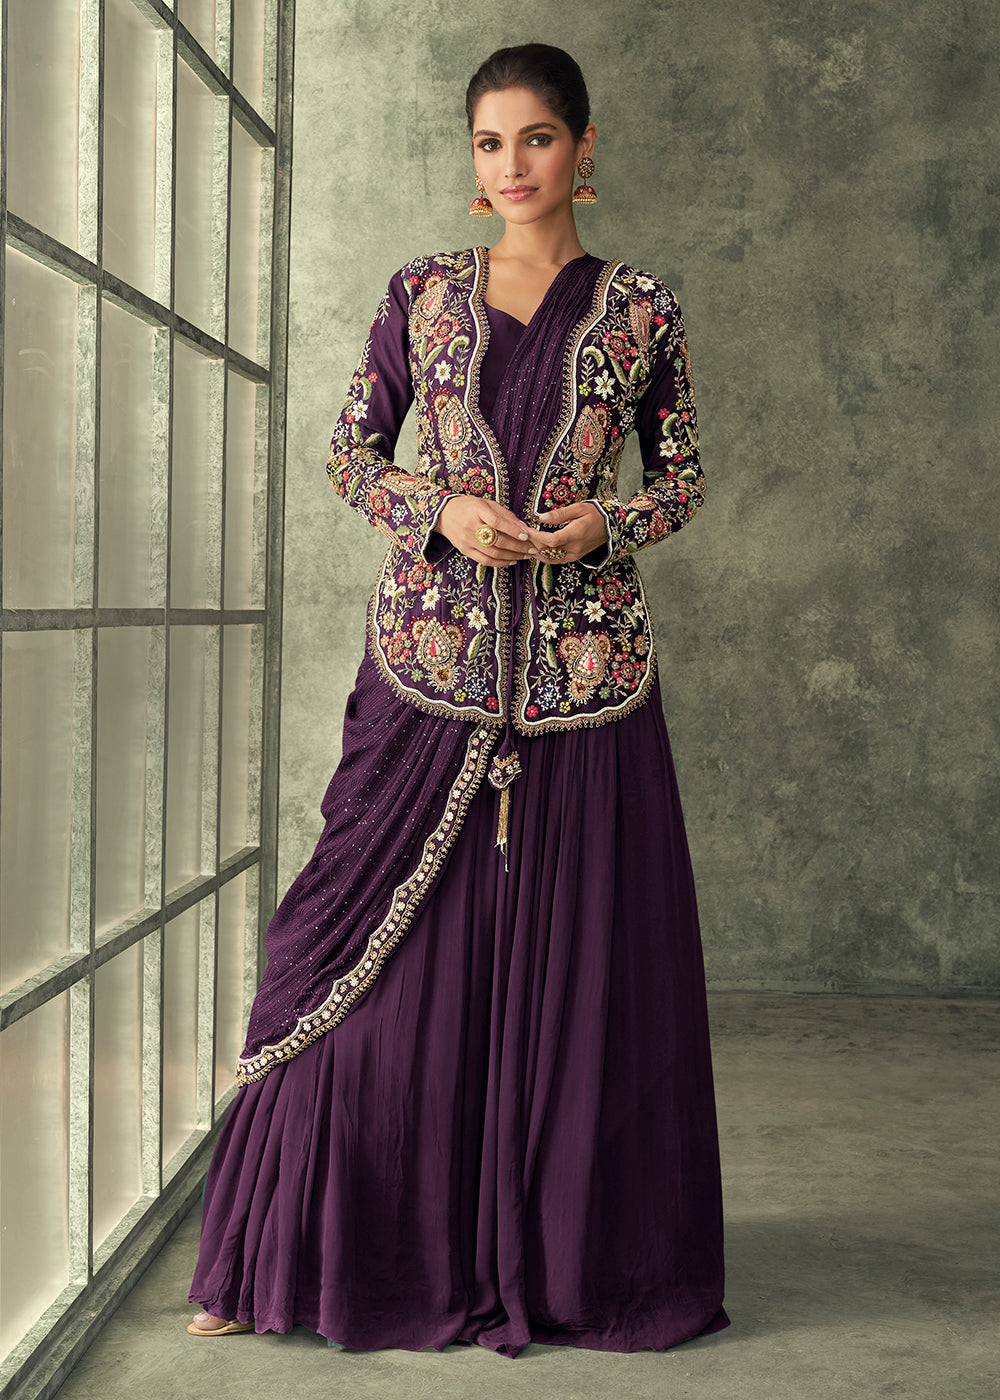 Buy Now Plum Purple Silk Embroidered Designer Gown with Jacket Online in USA, UK, Australia, Canada & Worldwide at Empress Clothing.